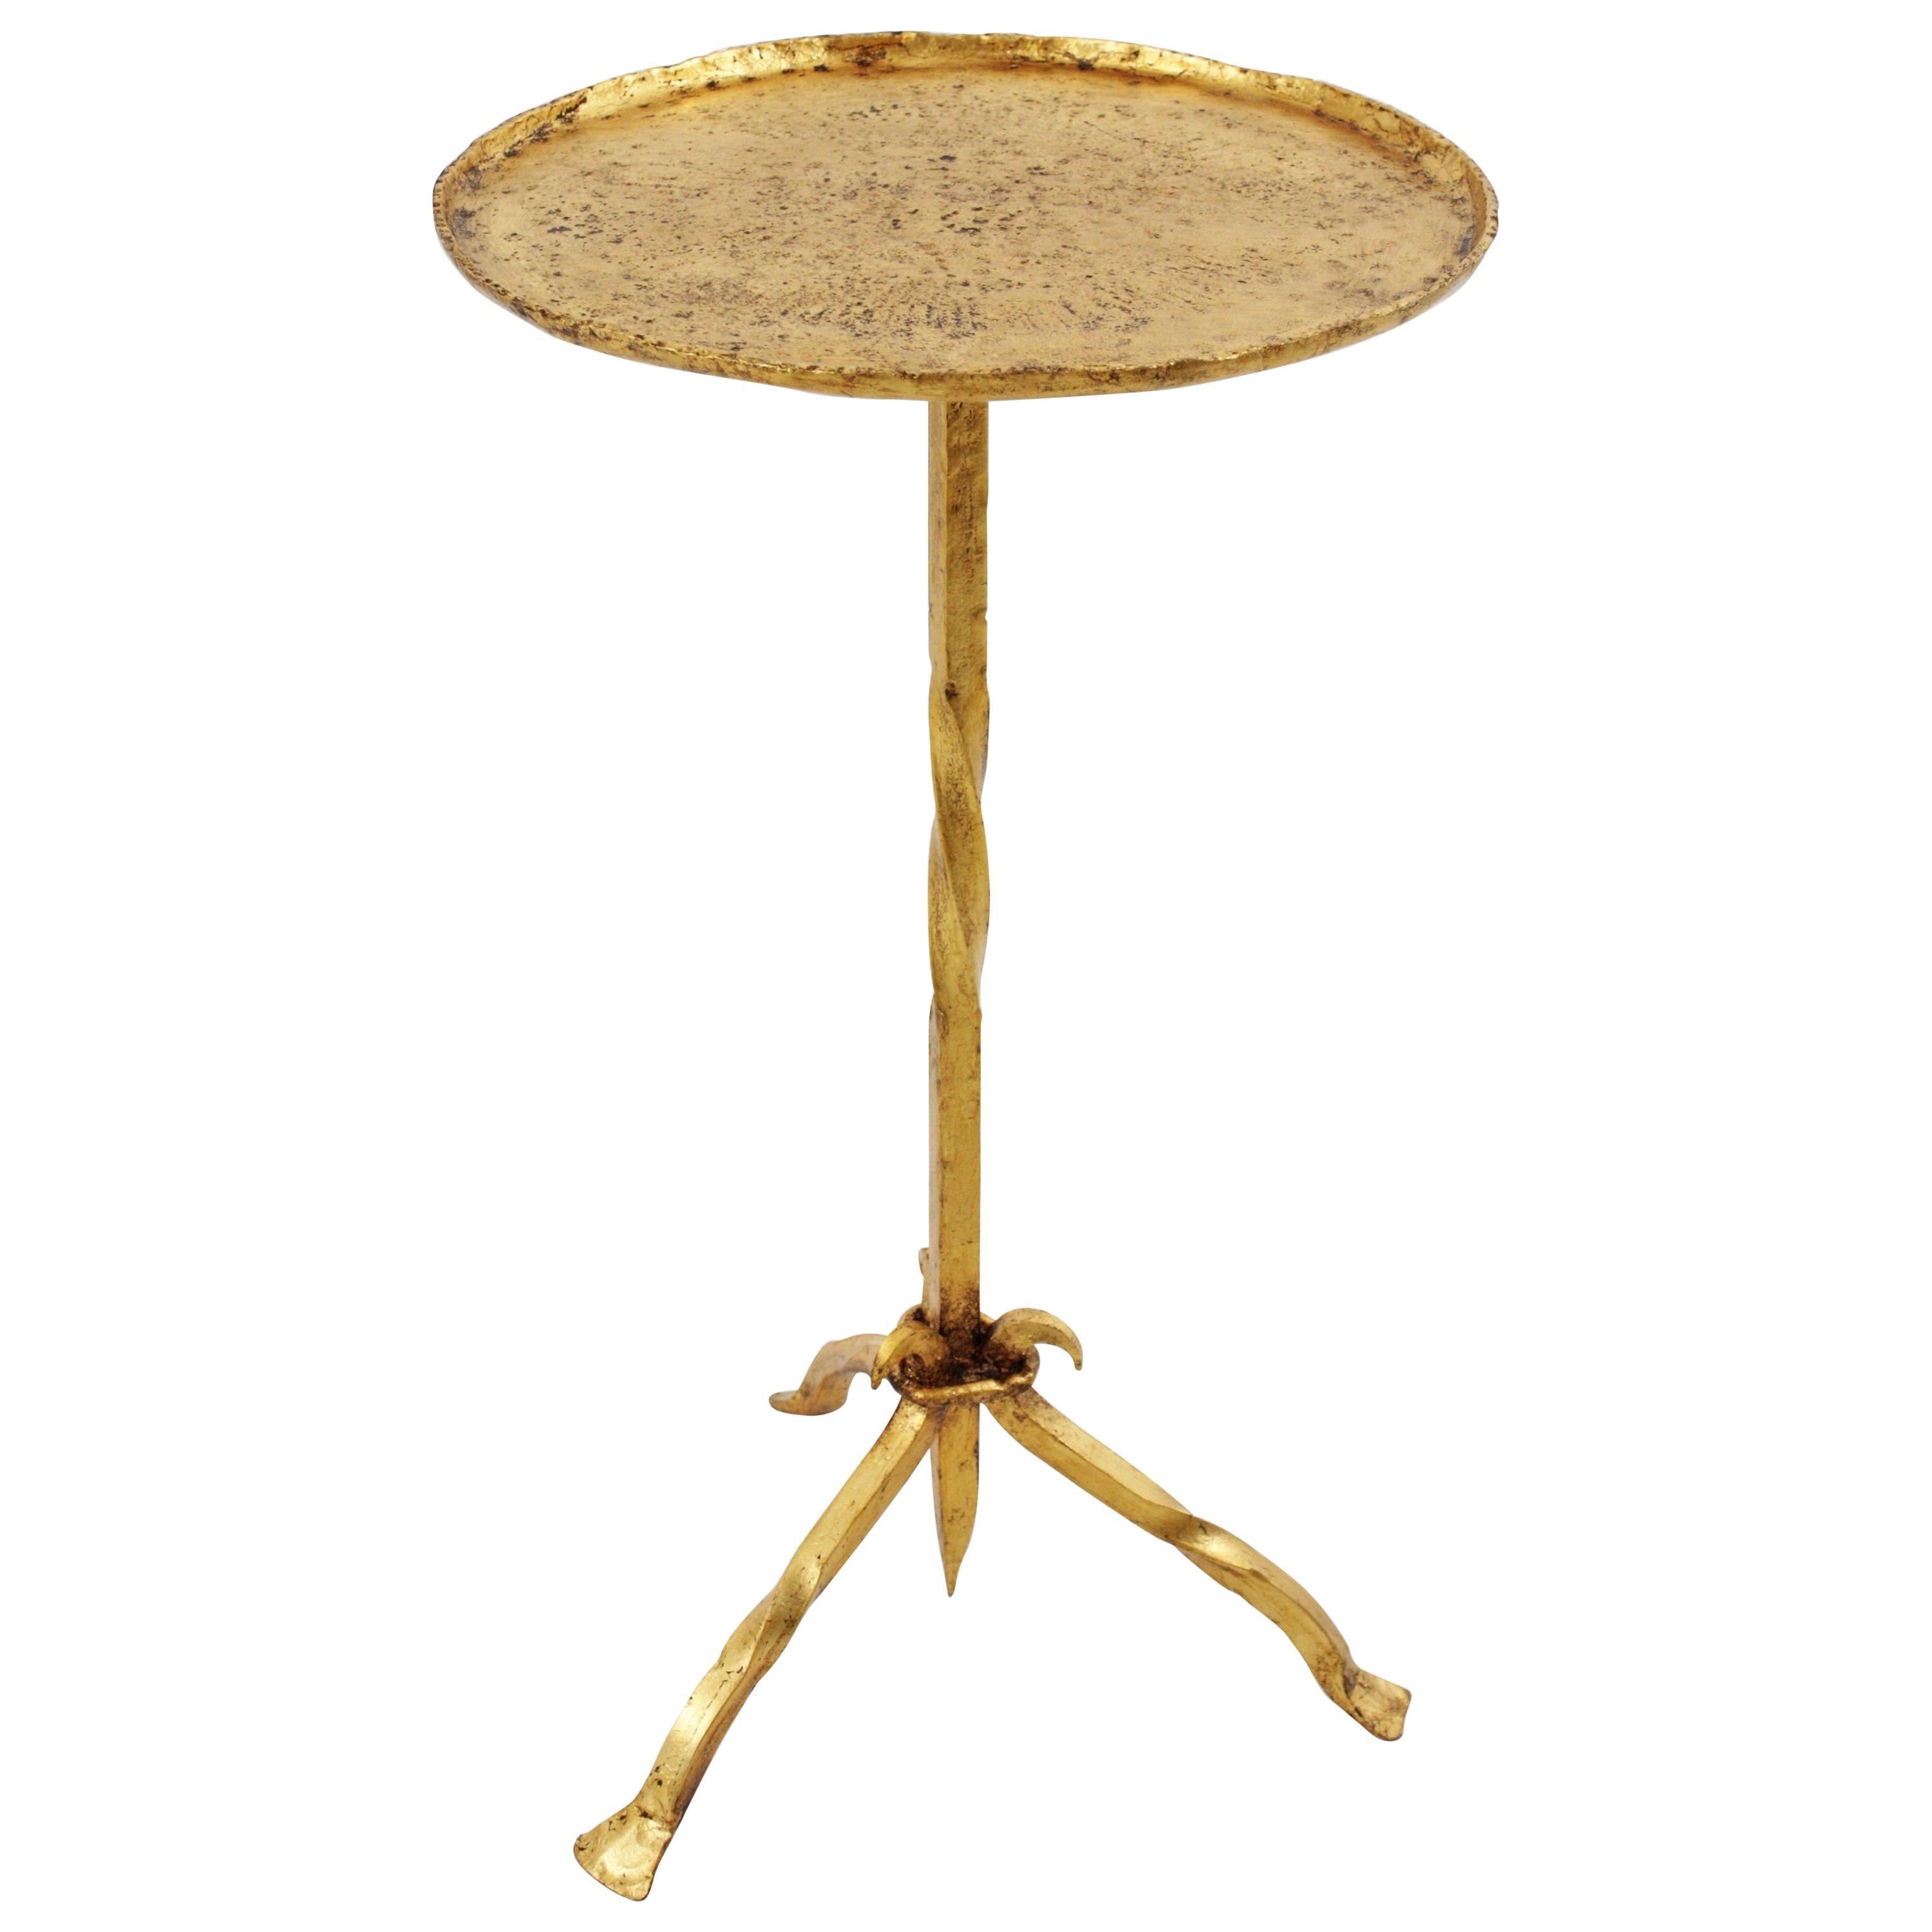  Spanish Gothic Style Gold Leaf Gilt Iron Drinks Table, Stand or Side Table 